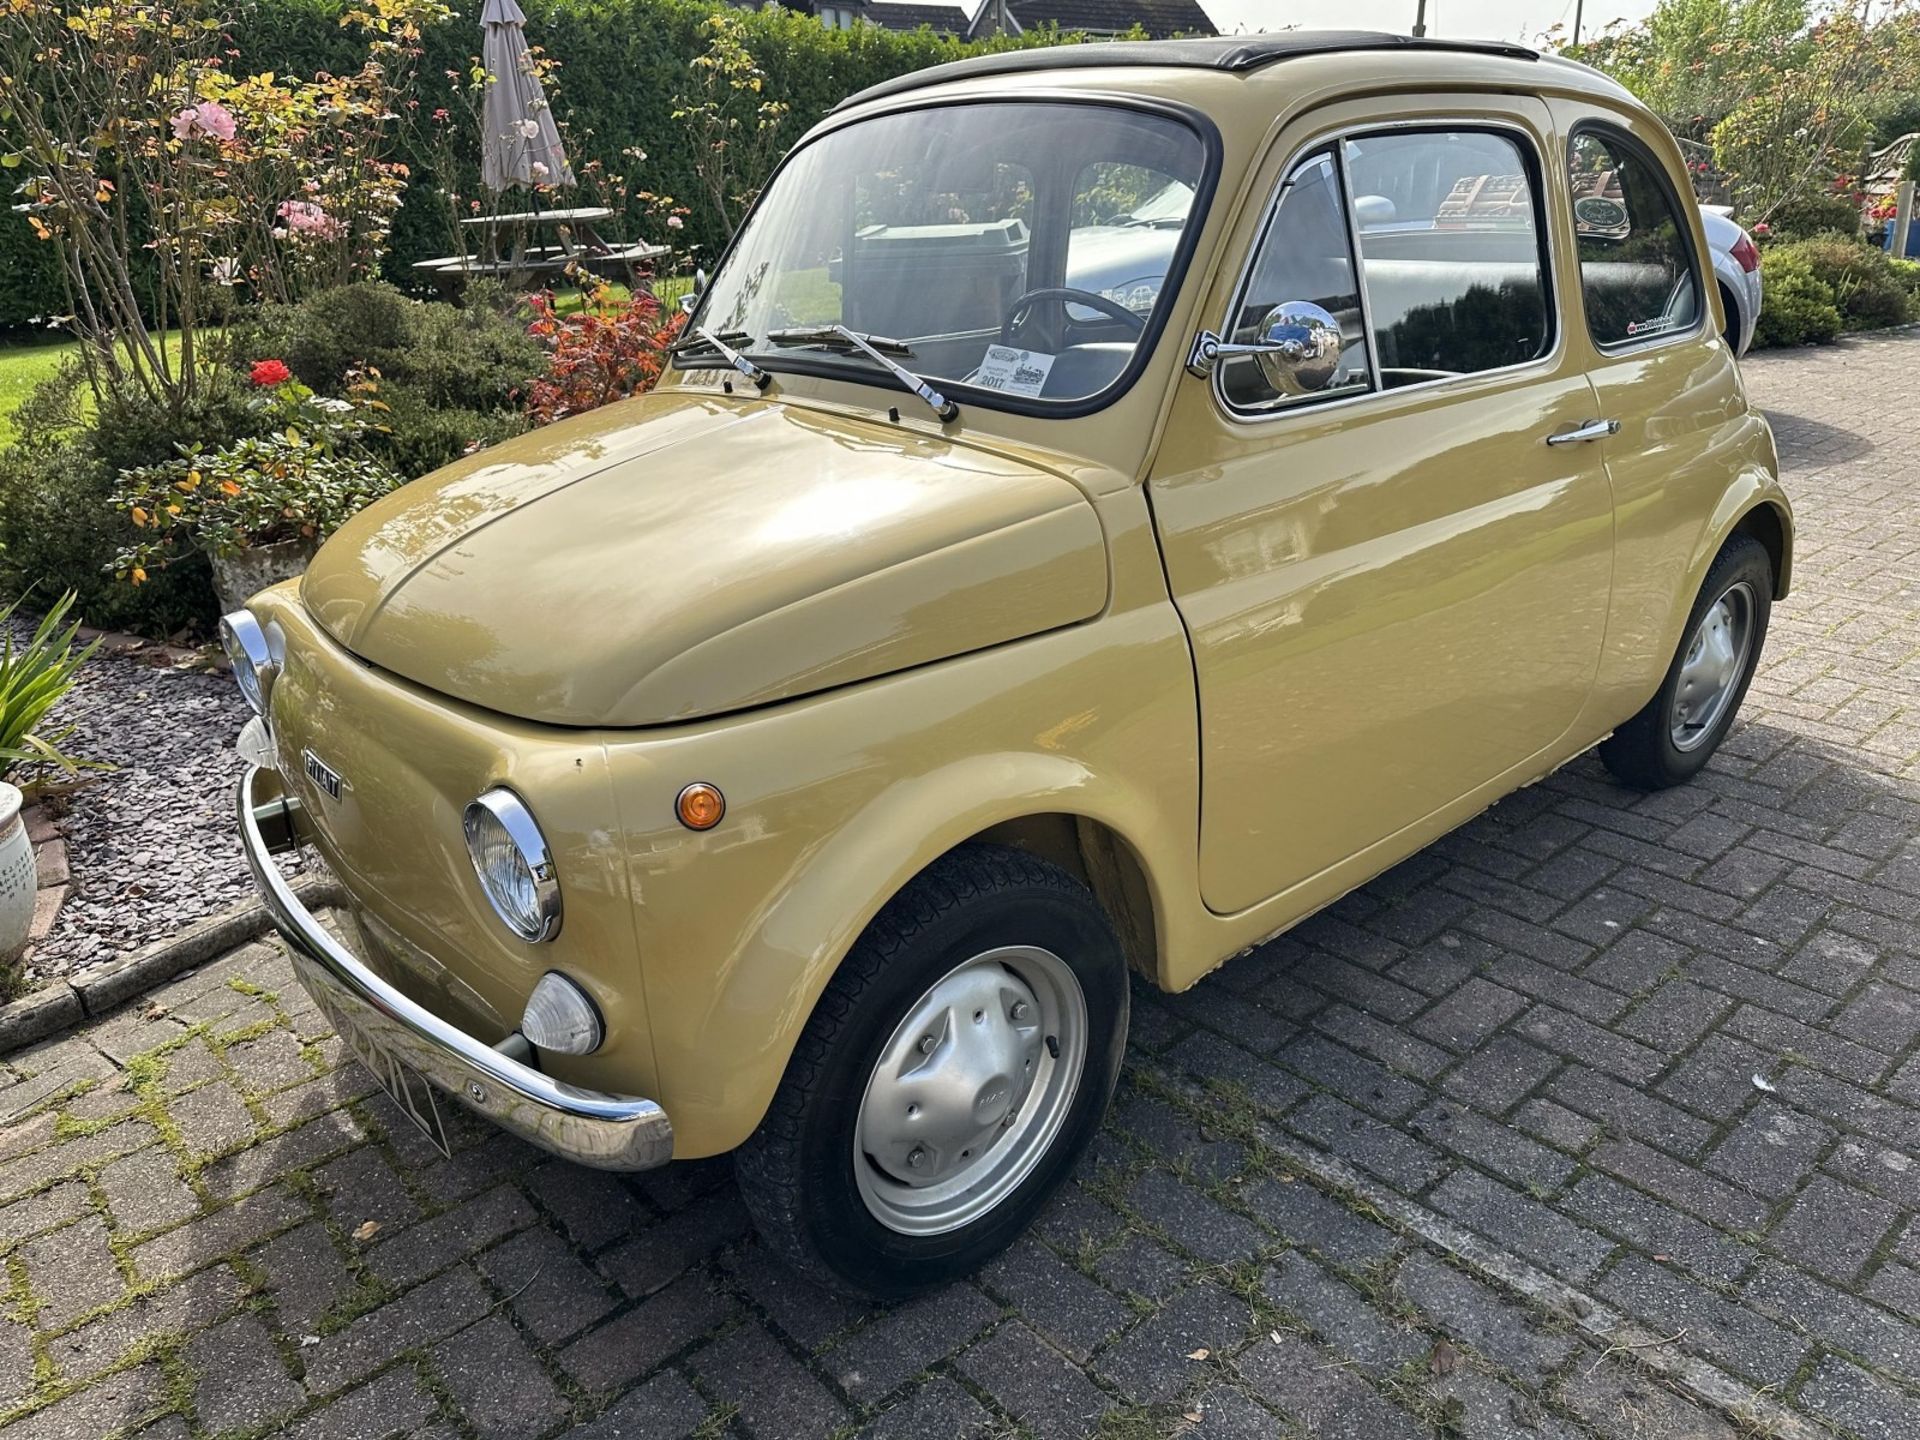 ***Being sold without reserve*** 1973 Fiat 500F Registration number EWV 227LChassis number